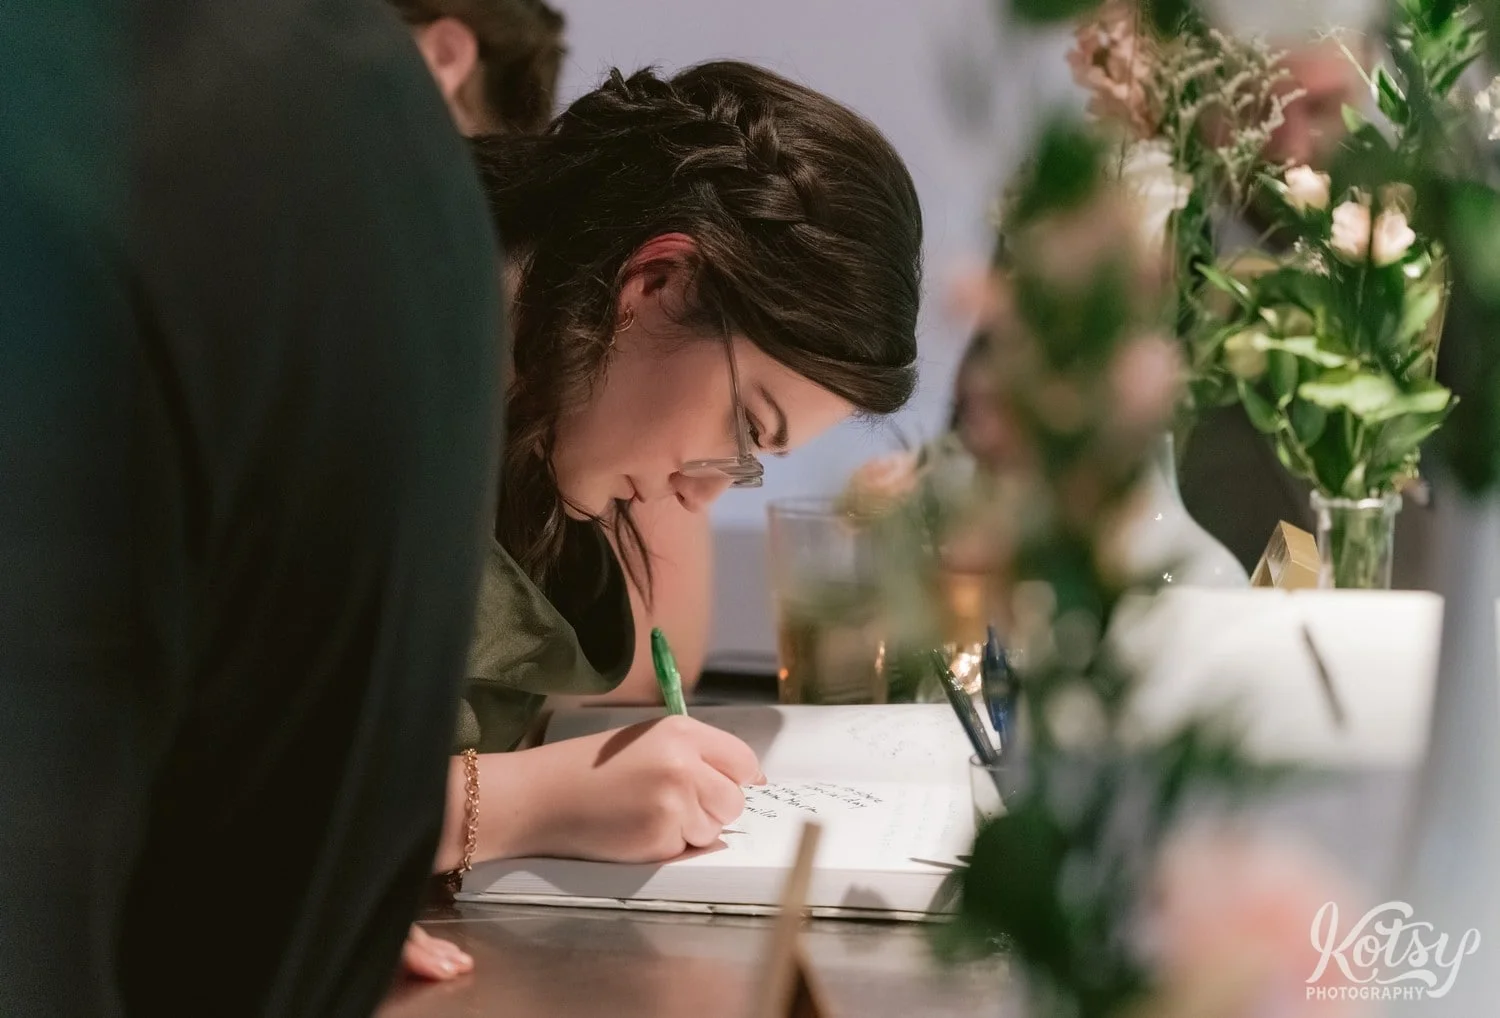 close up shot of a woman in a green dress writing in a guest book during a Second floor events wedding reception In Toronto Canada